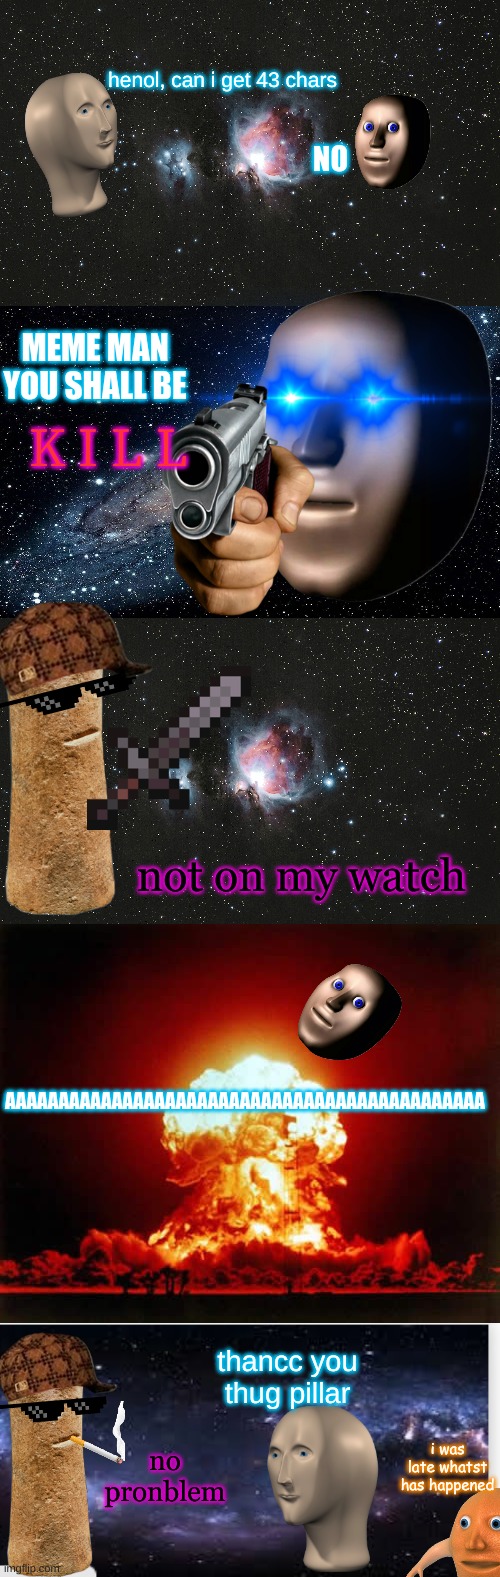 surreal memes: the thug pillar |  henol, can i get 43 chars; NO; MEME MAN YOU SHALL BE; K I L L; not on my watch; AAAAAAAAAAAAAAAAAAAAAAAAAAAAAAAAAAAAAAAAAAAAA; thancc you thug pillar; no pronblem; i was late whatst has happened | image tagged in galaxy,memes,nuclear explosion,surreal memes backdrop,thug life,surreal | made w/ Imgflip meme maker